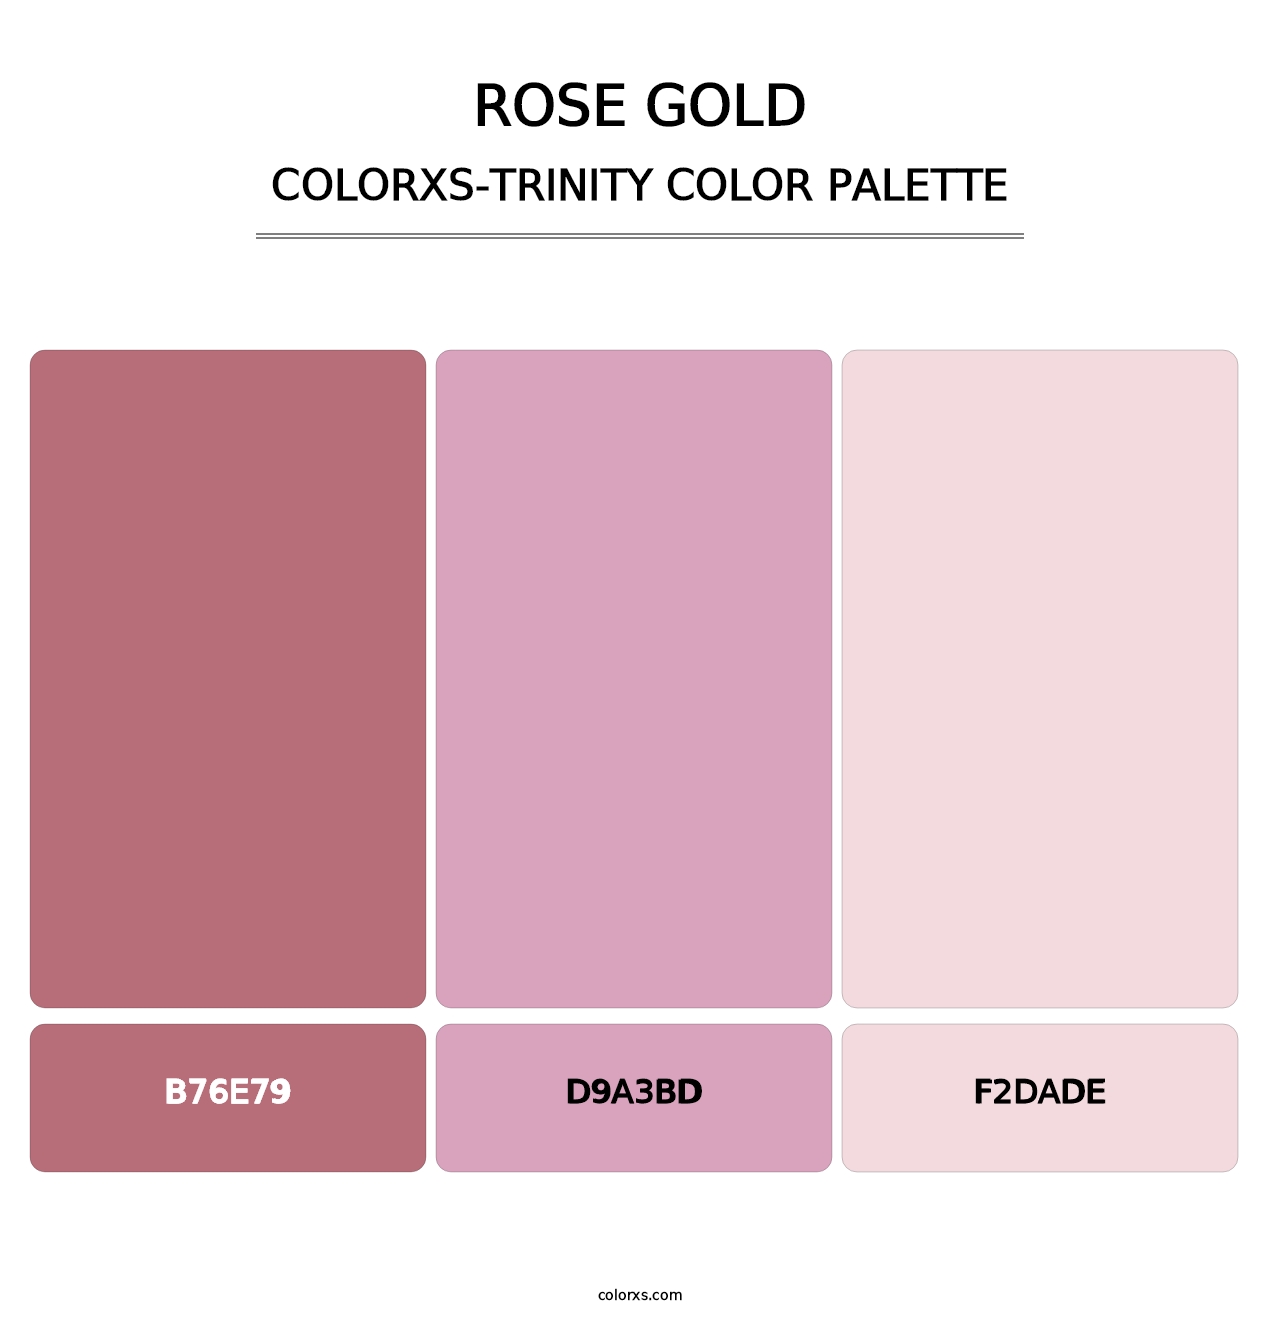 Rose Gold - Colorxs Trinity Palette